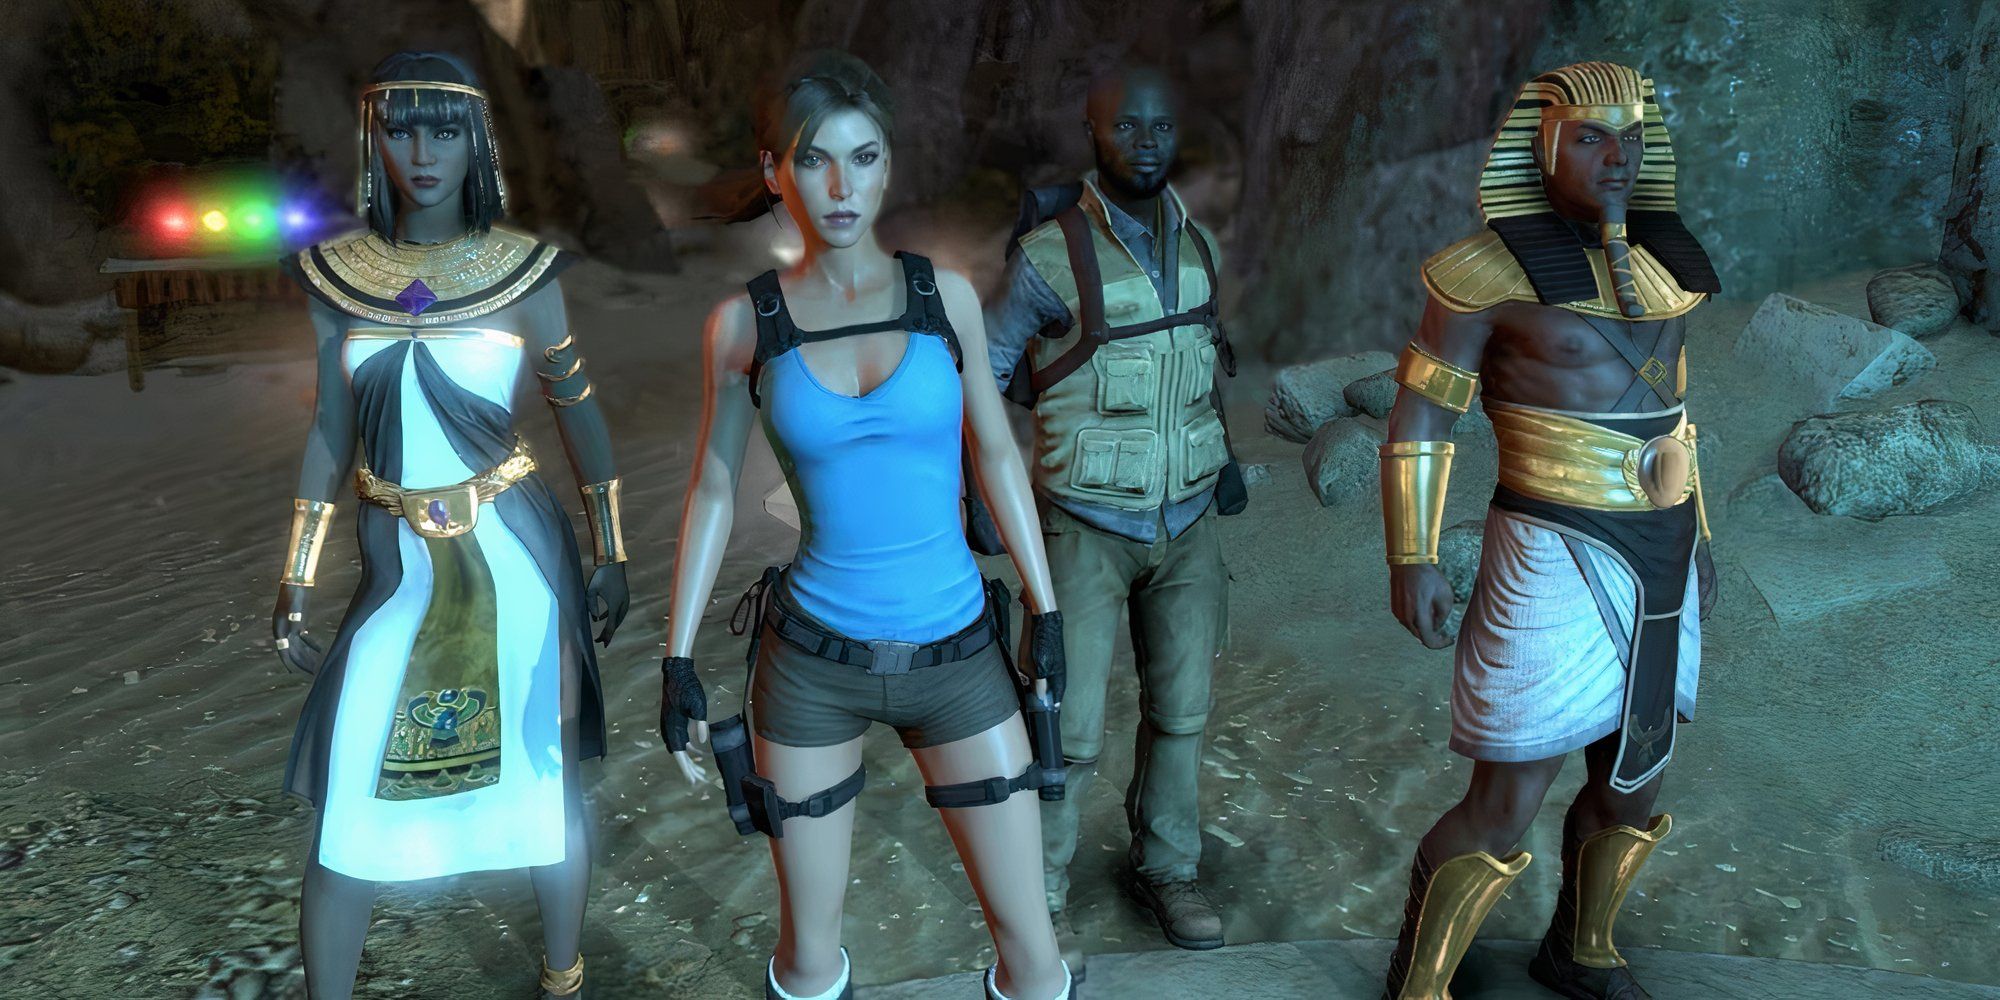 A cutscene featuring characters in Lara Croft And The Temple Of Osiris